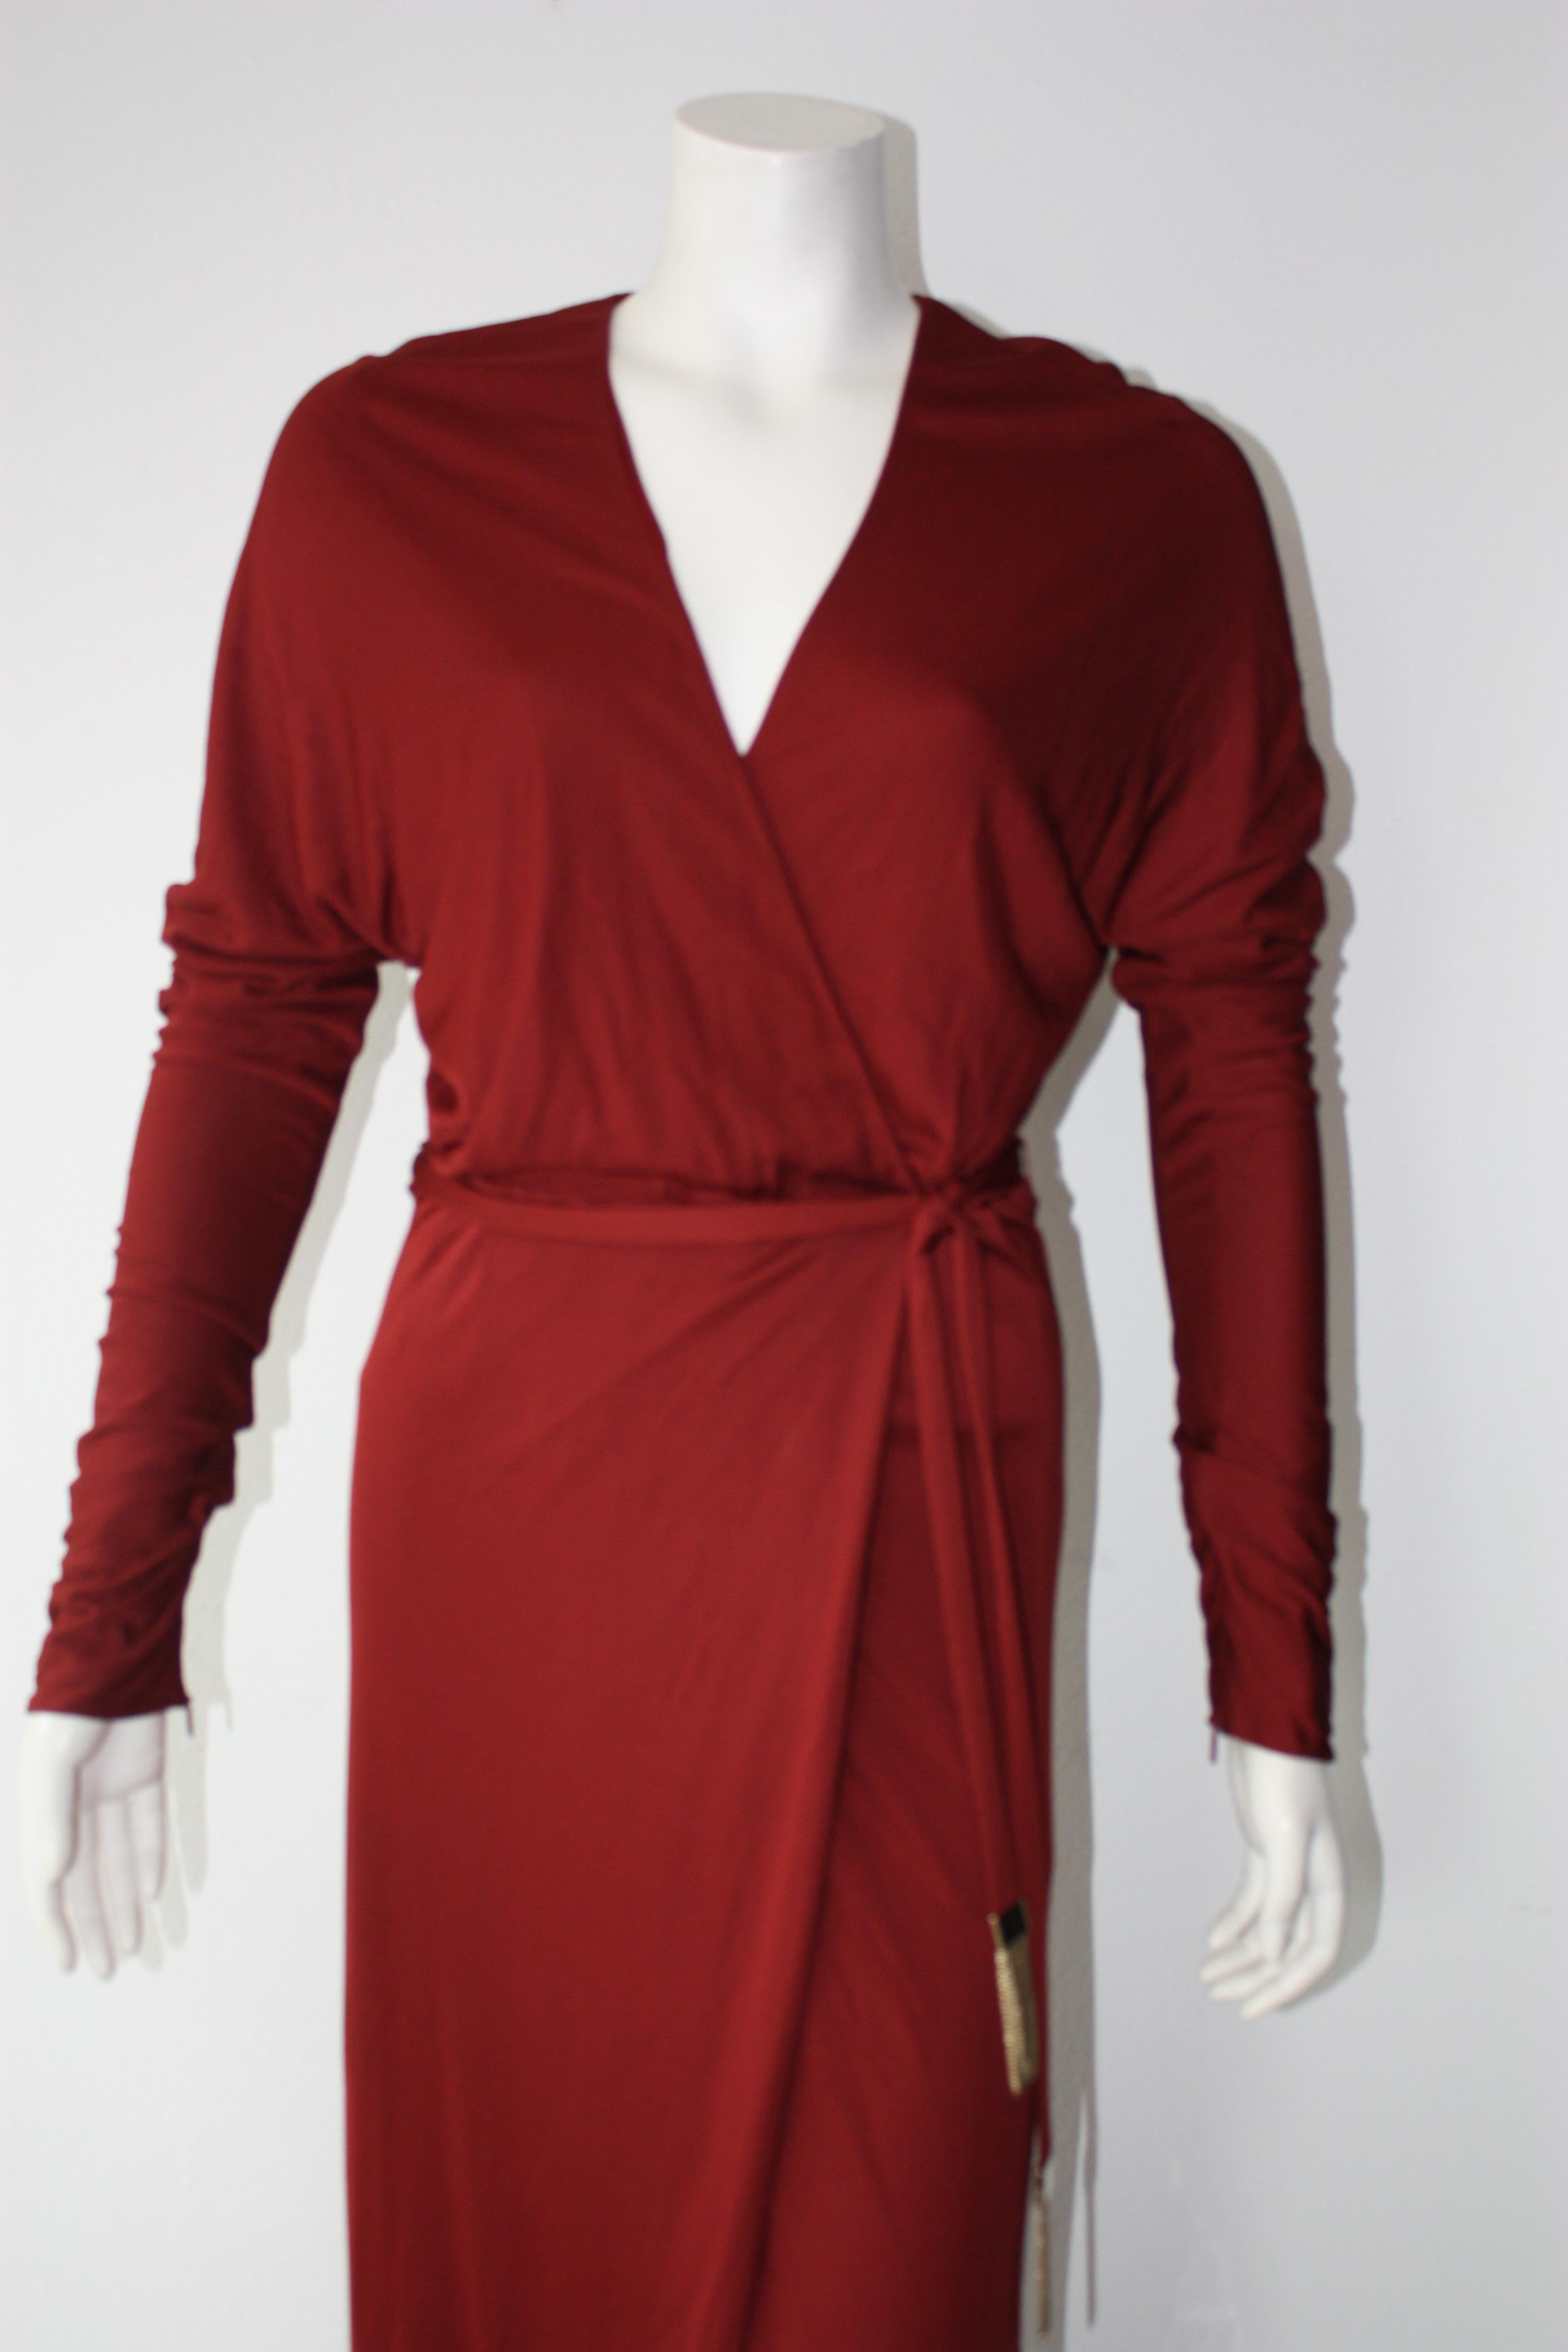 Gucci burgundy red long sleeve wrap evening gown. Tom Ford era. 
Sash with gold chain accents.

100% viscose.
Size 40